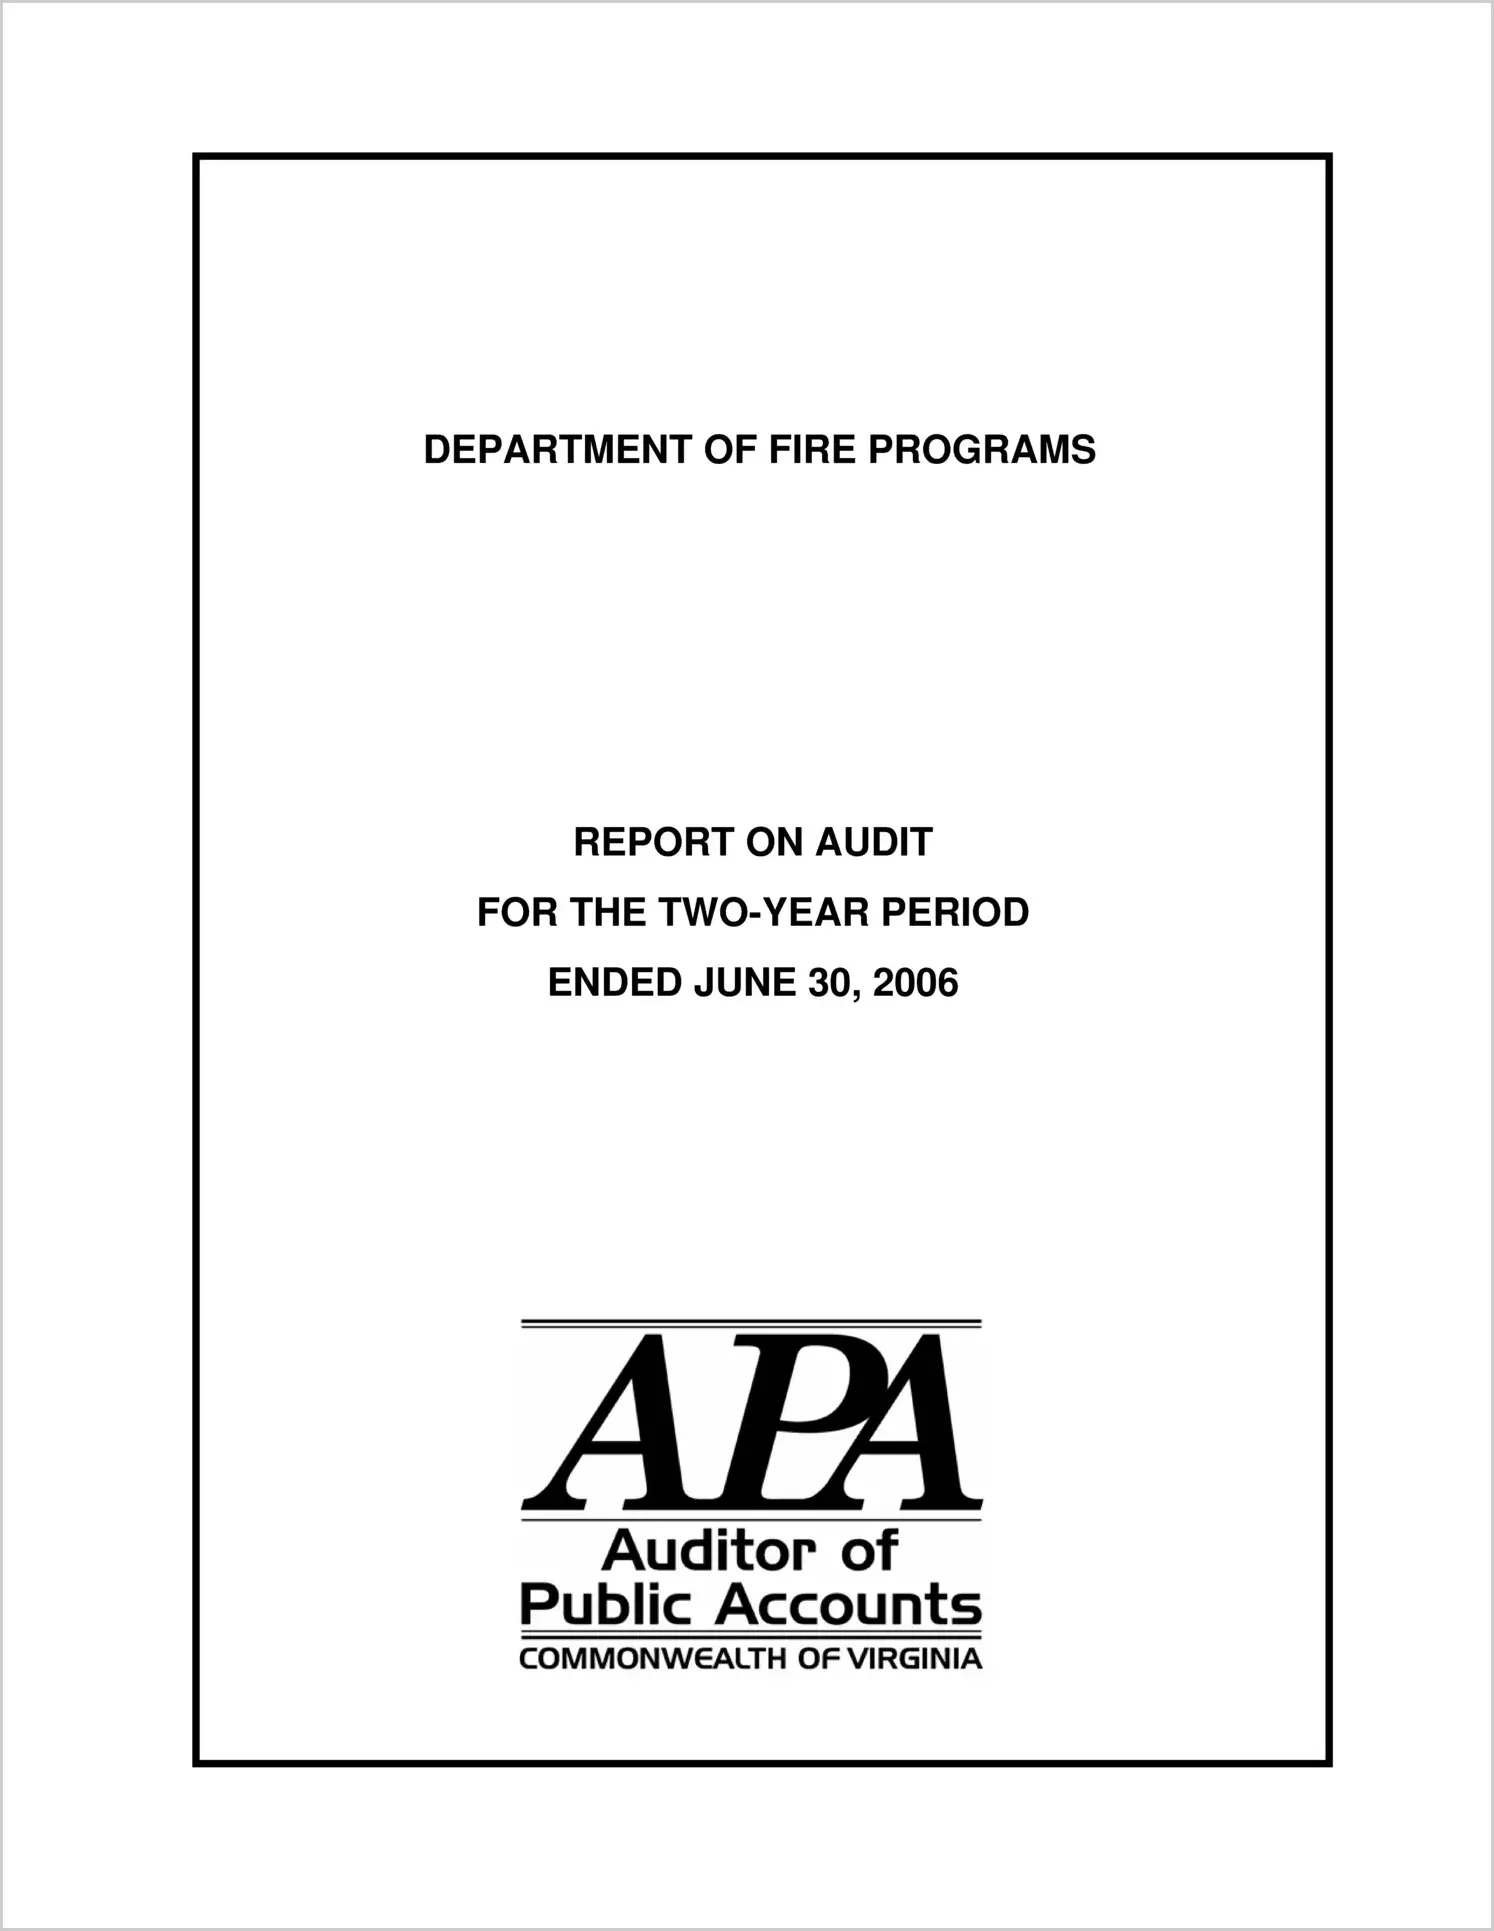 Department of Fire Programs for the two-year period Ended June 30, 2006